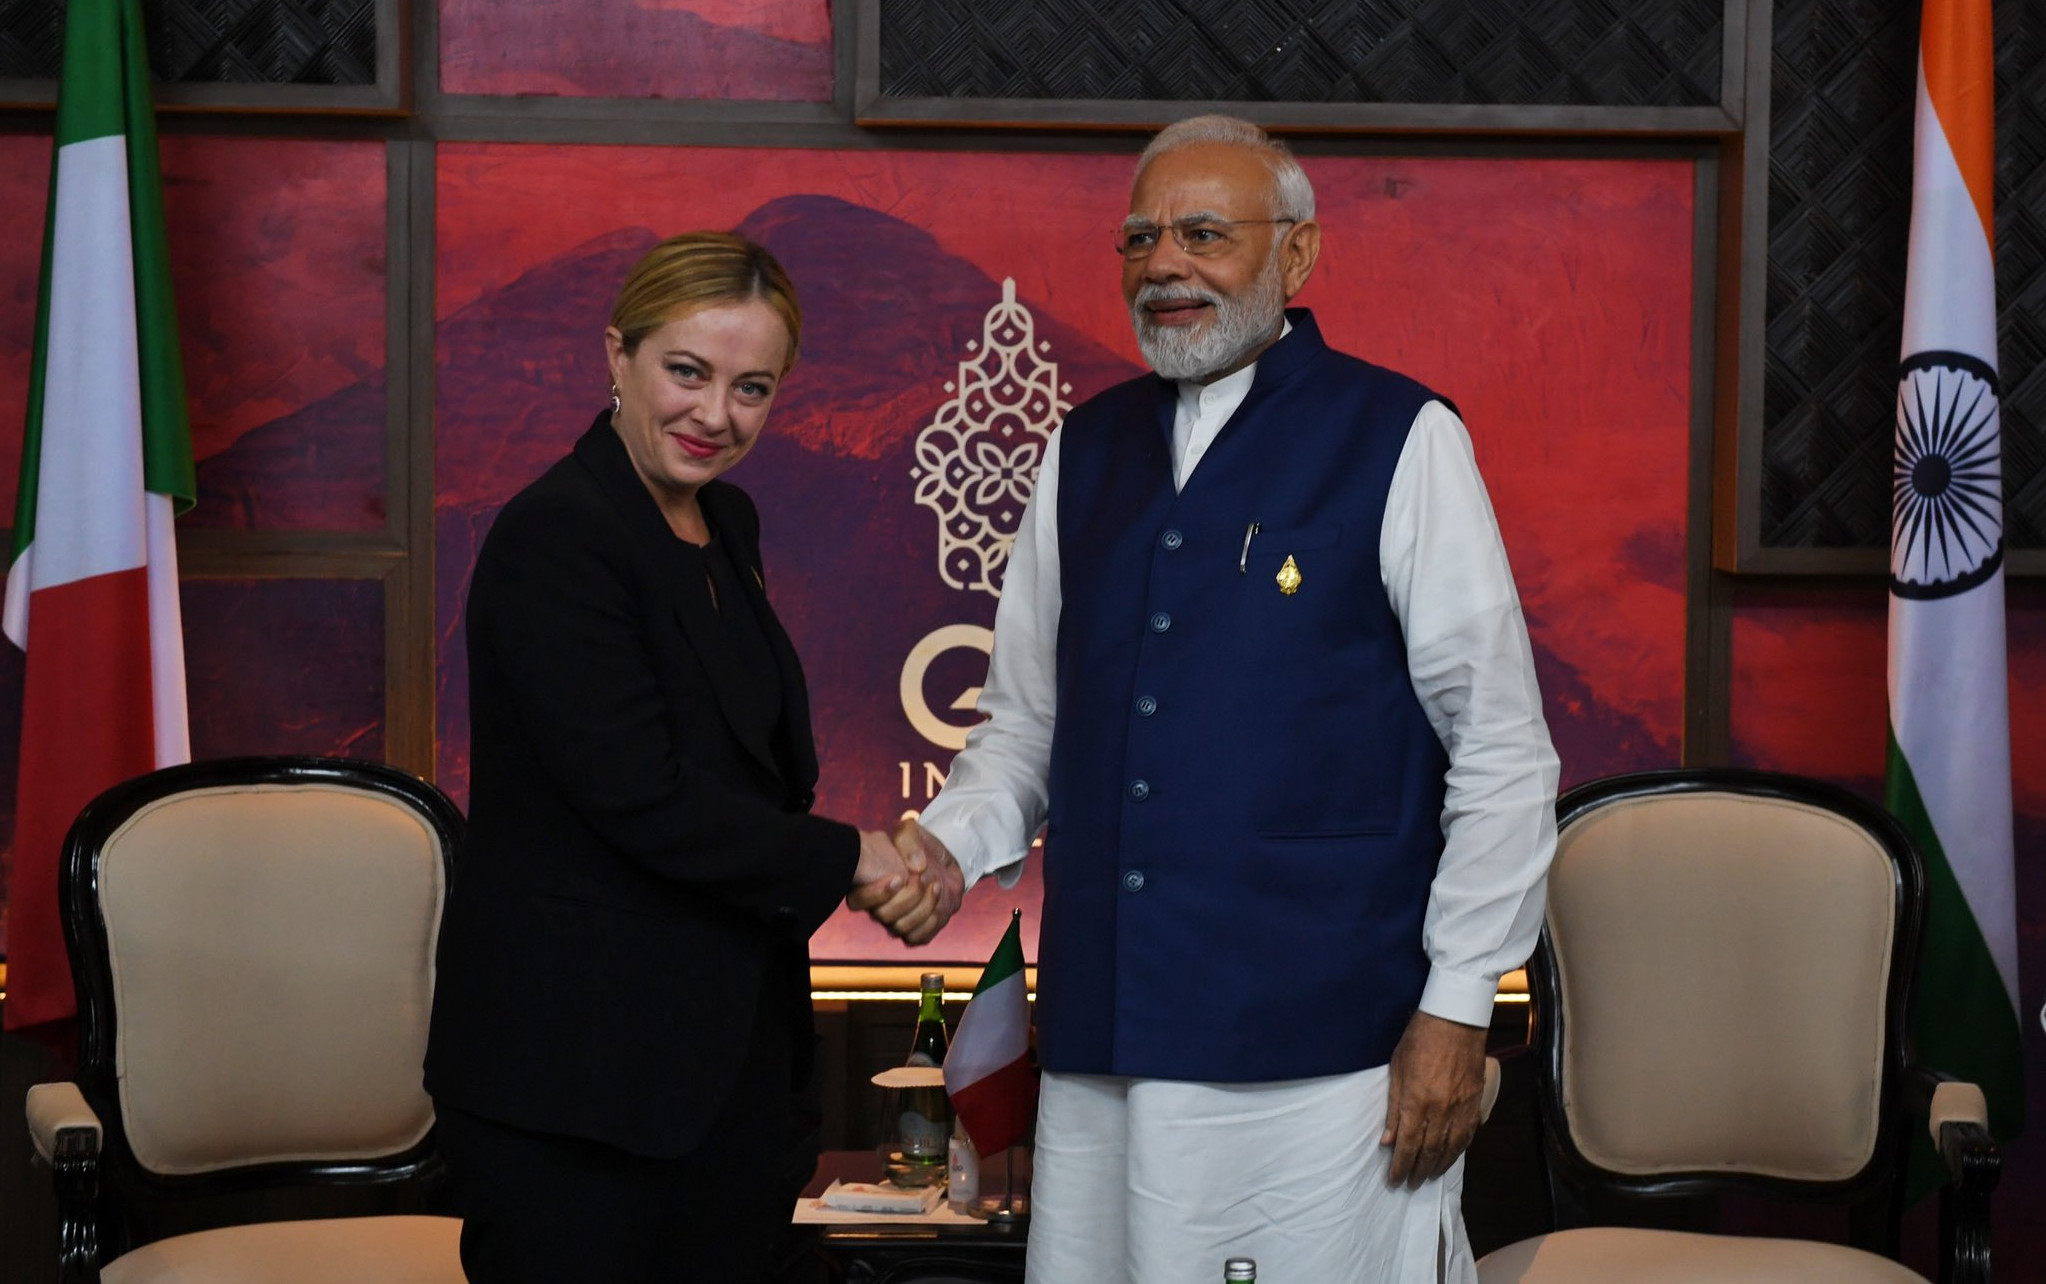 Meeting between Prime Minister Narendra Modi and President of the Council of Ministers of Italy Giorgia Meloni on the sidelines of G20 in Bali, Indonesia.